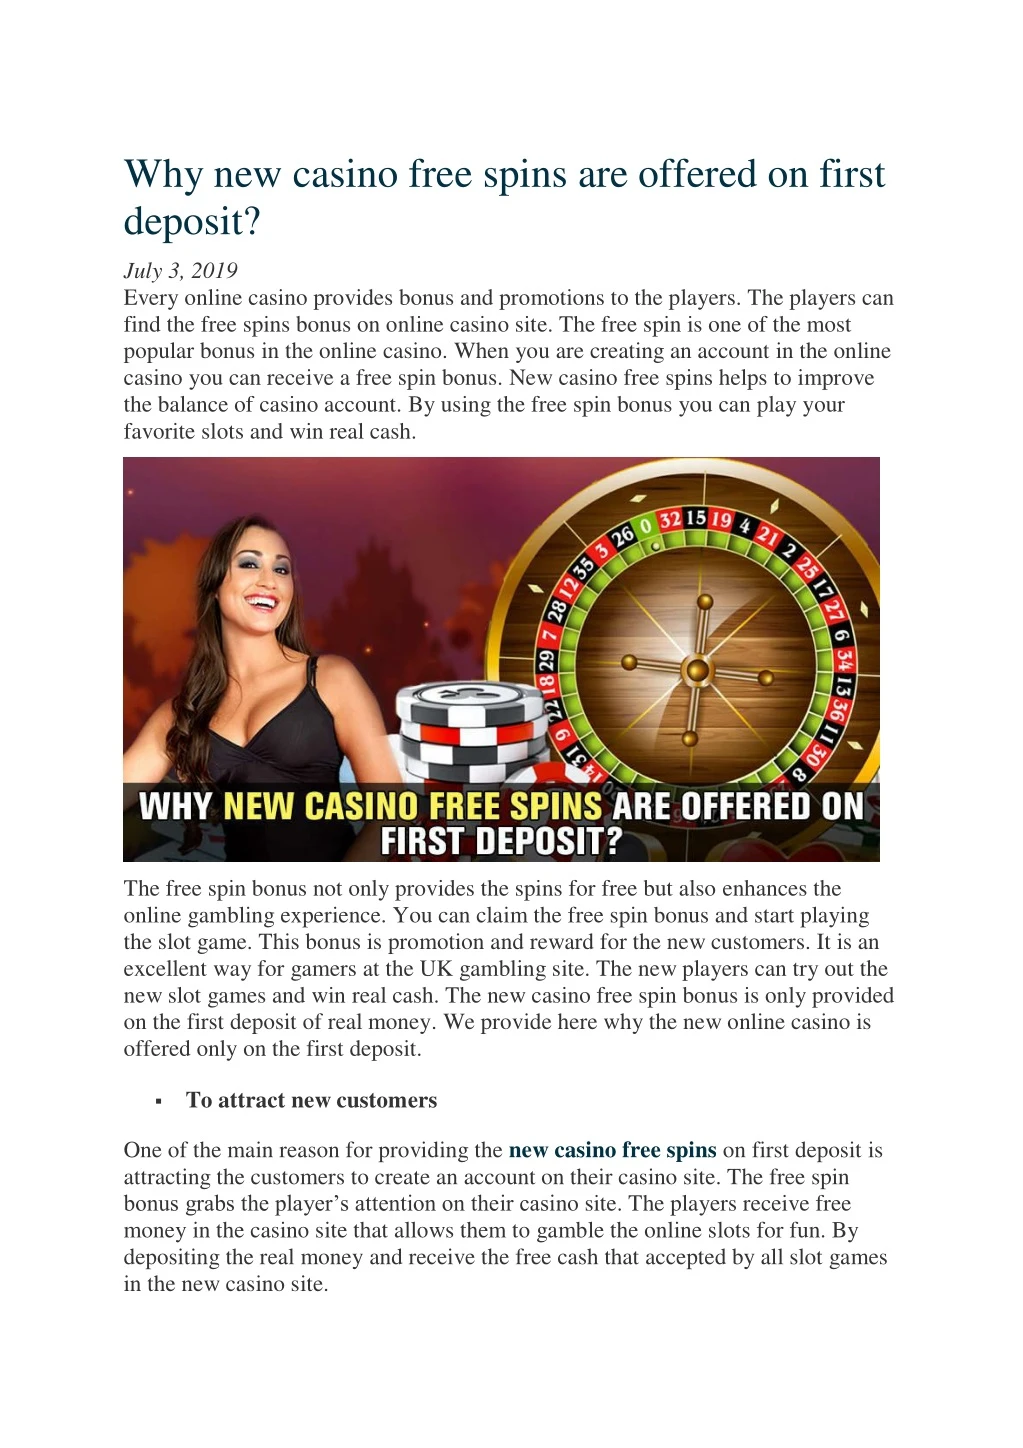 why new casino free spins are offered on first